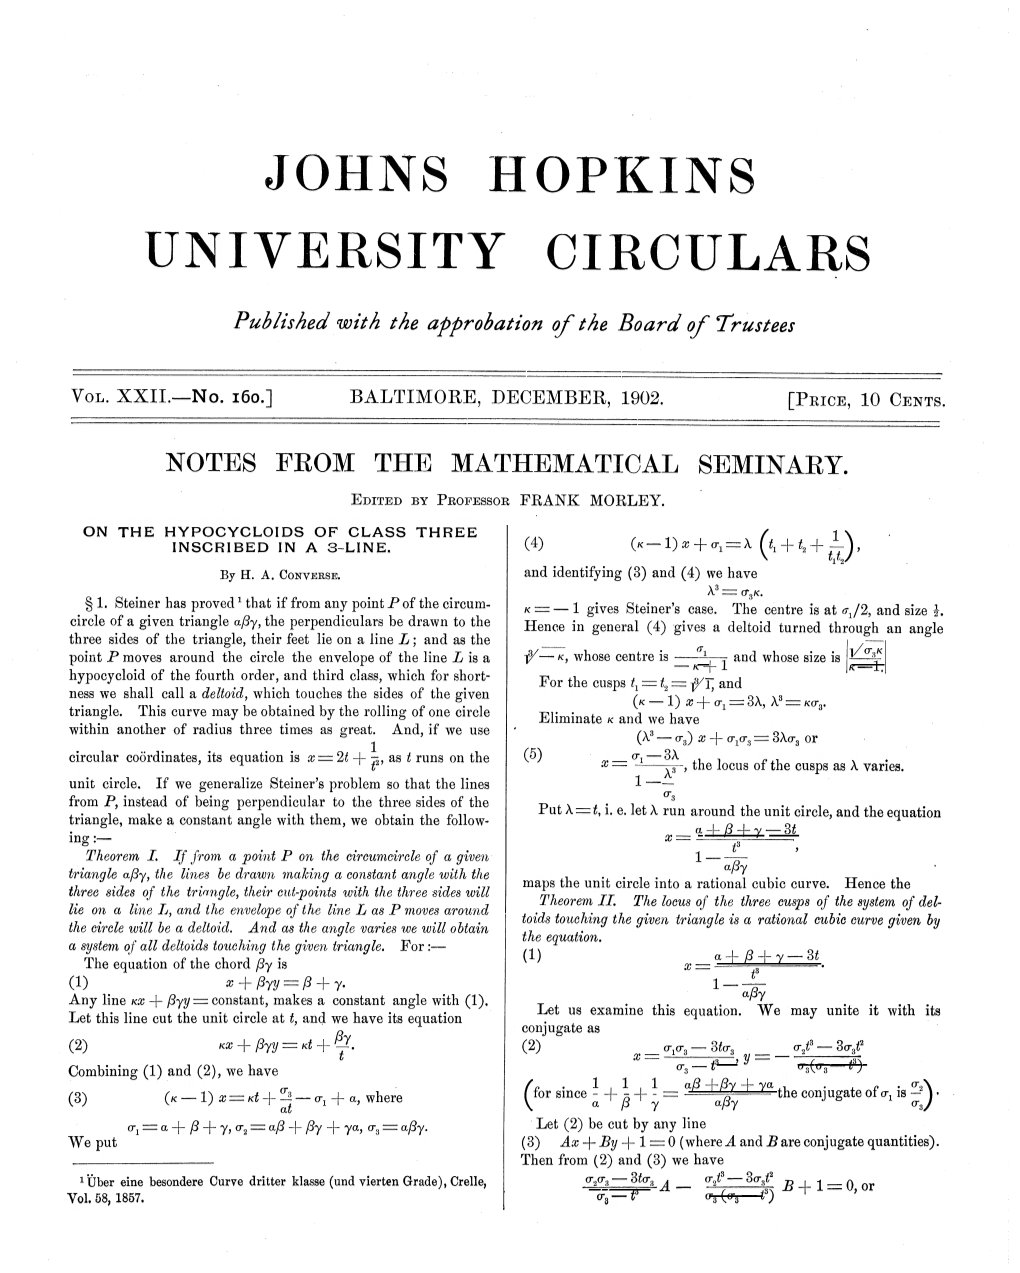 Notes from the Mathematical Seminary